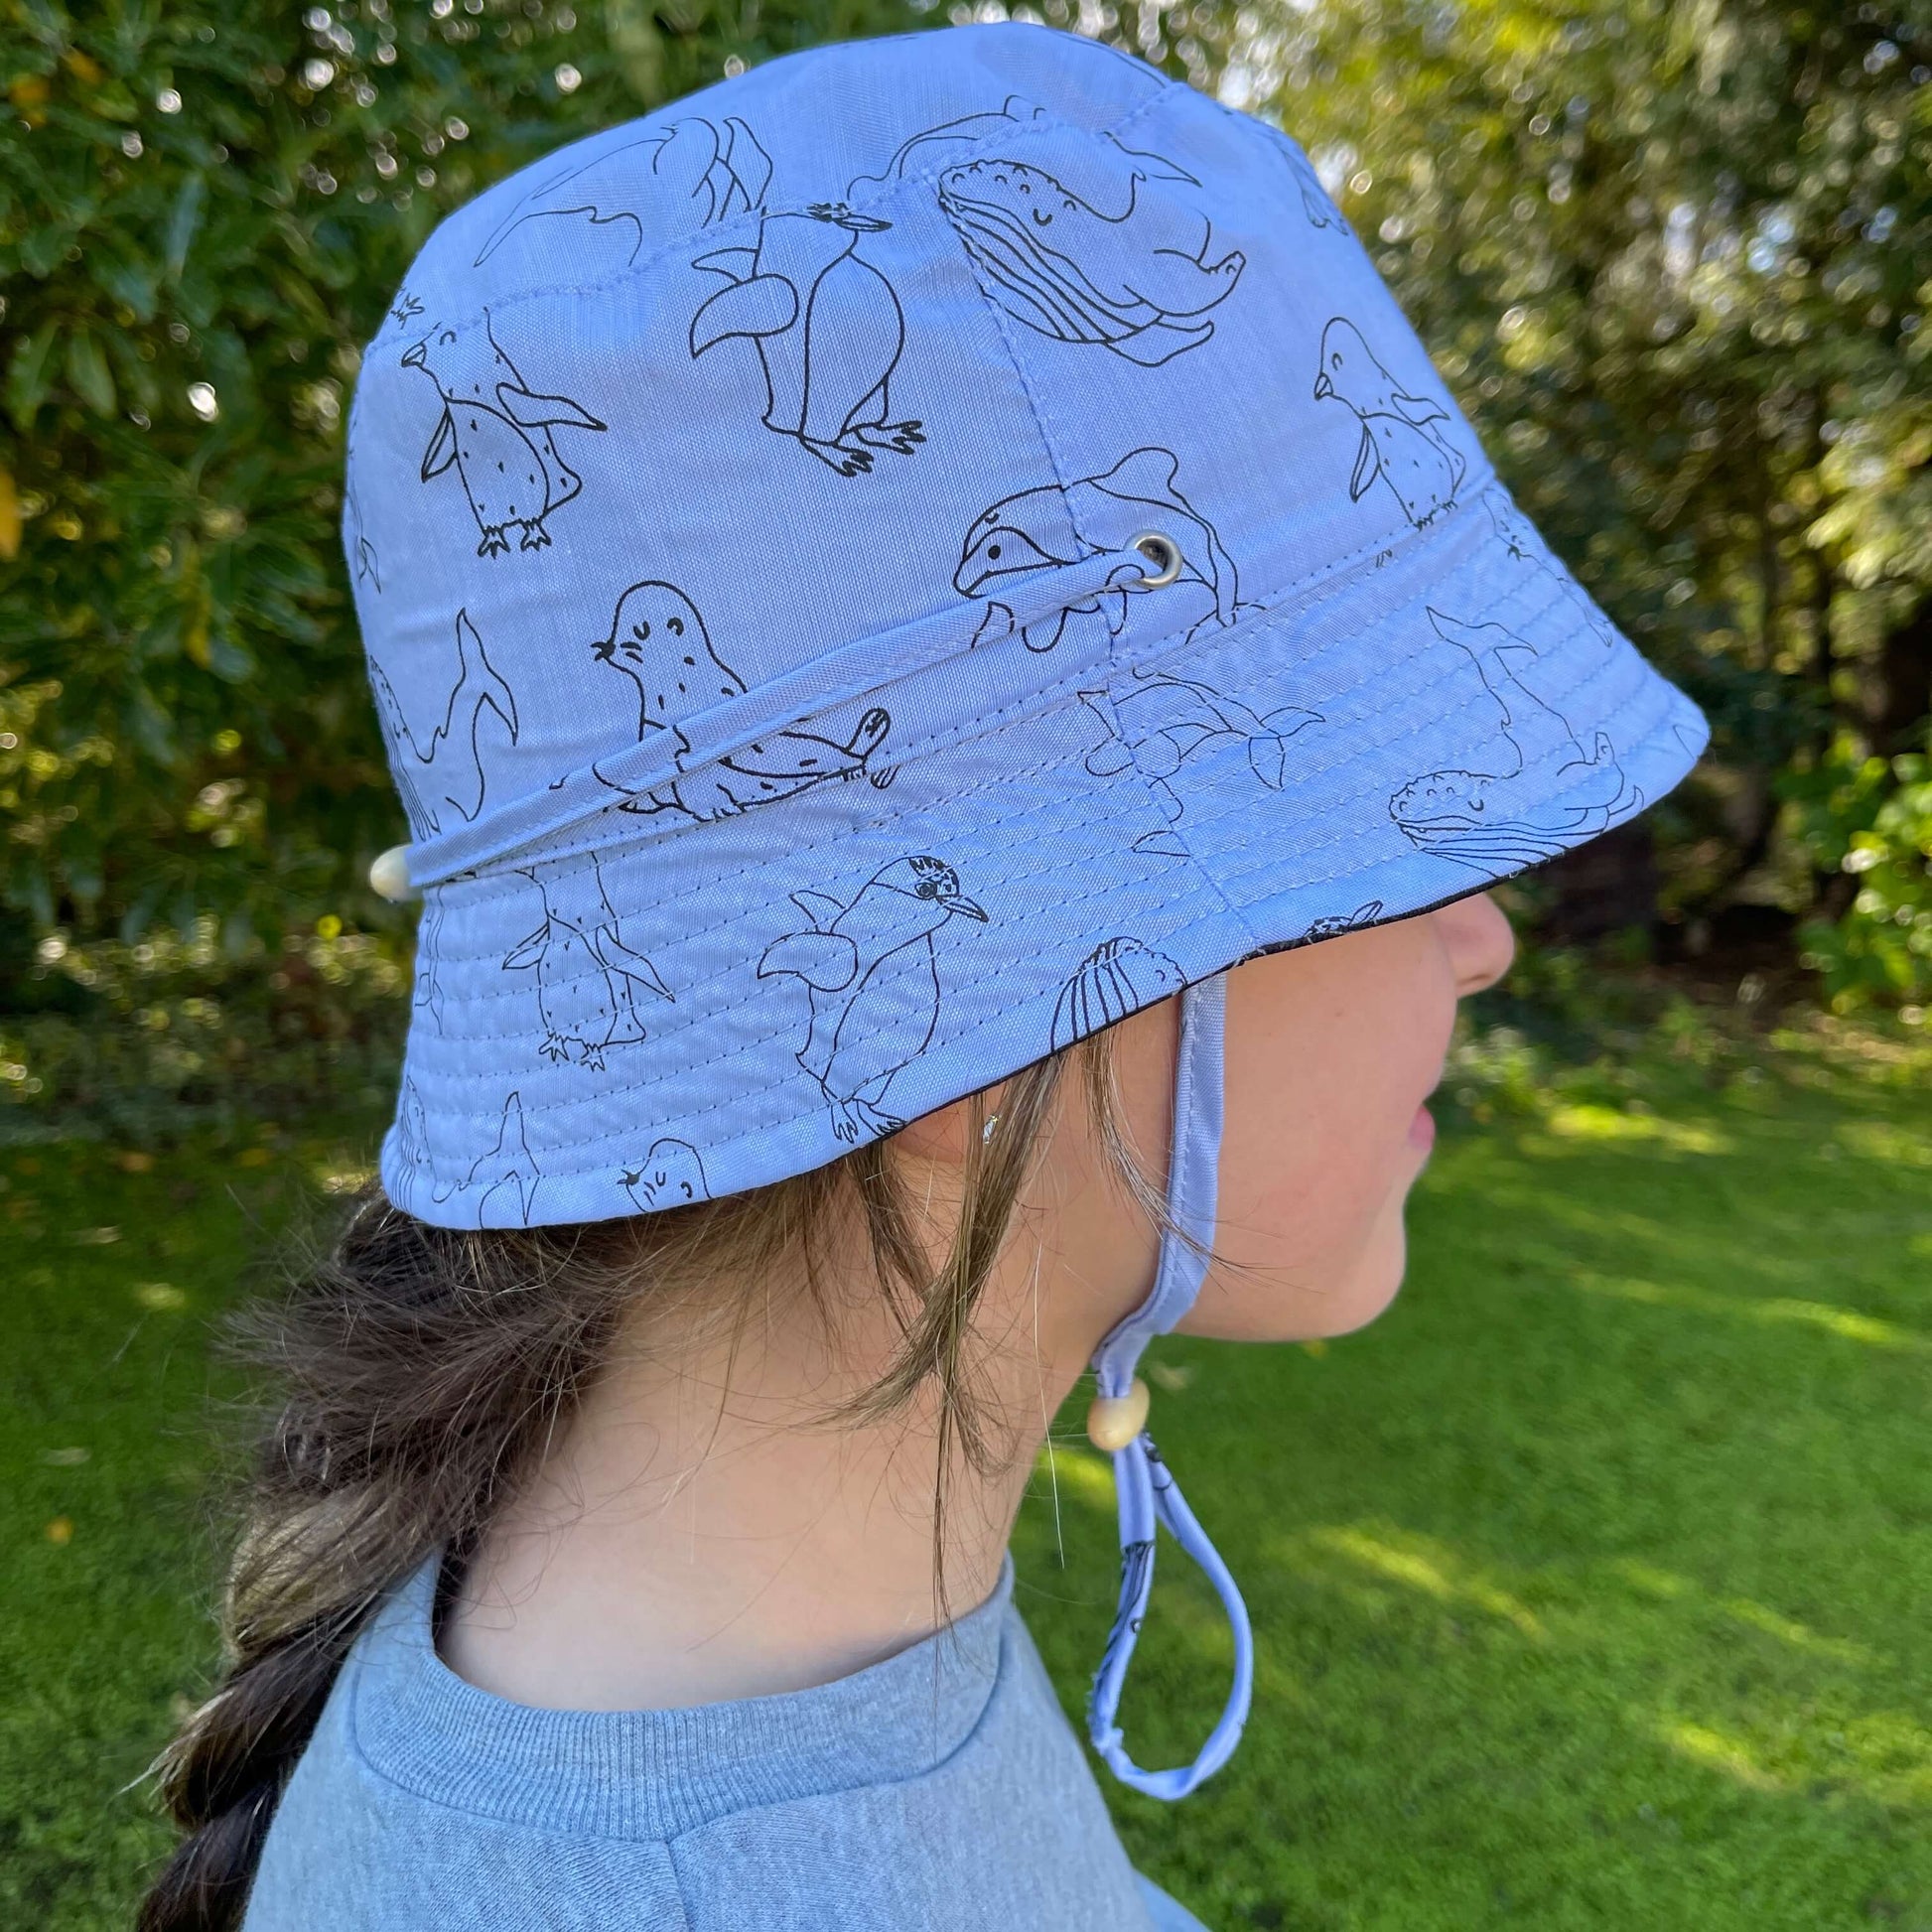 Girl wearing a bucket hat in denim blue with animal outlines in black and tied under the chin.